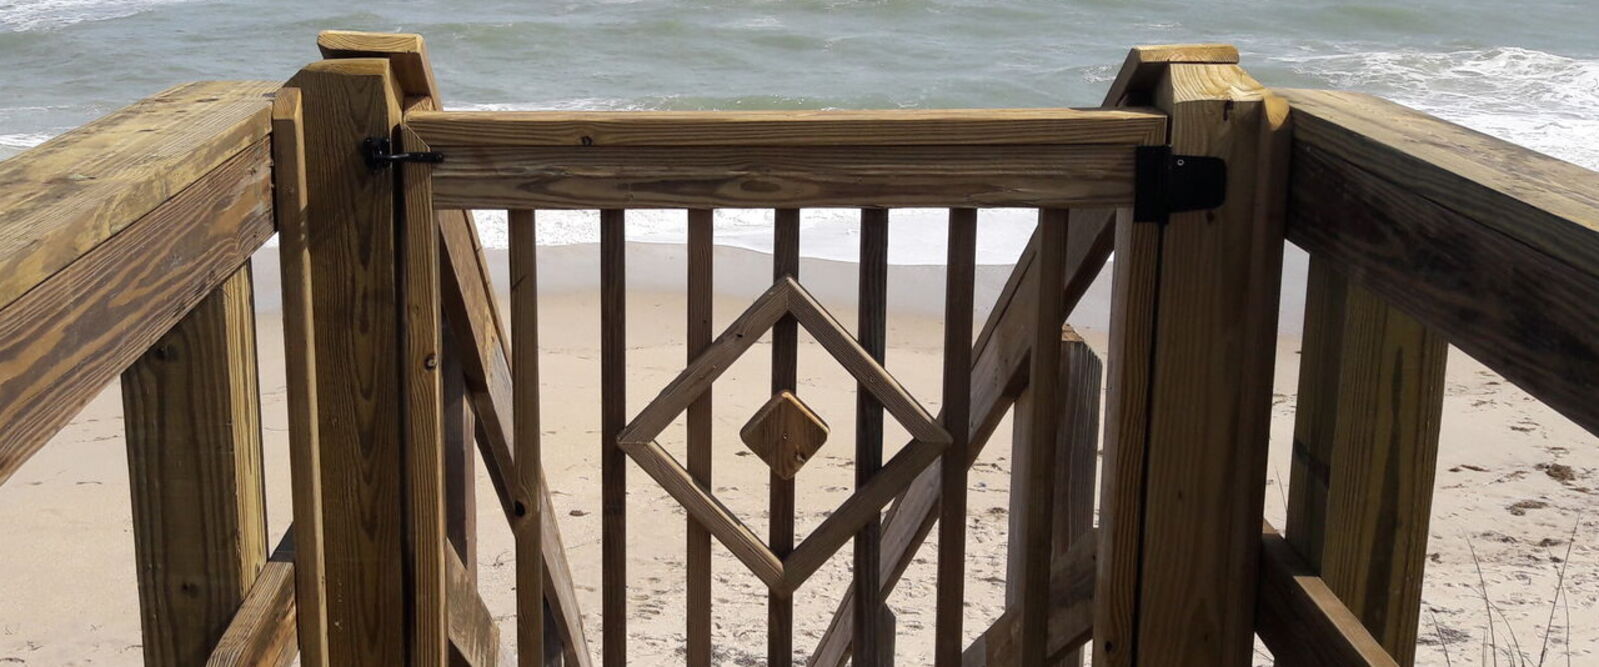 hardwood gate before staircase on a beach access